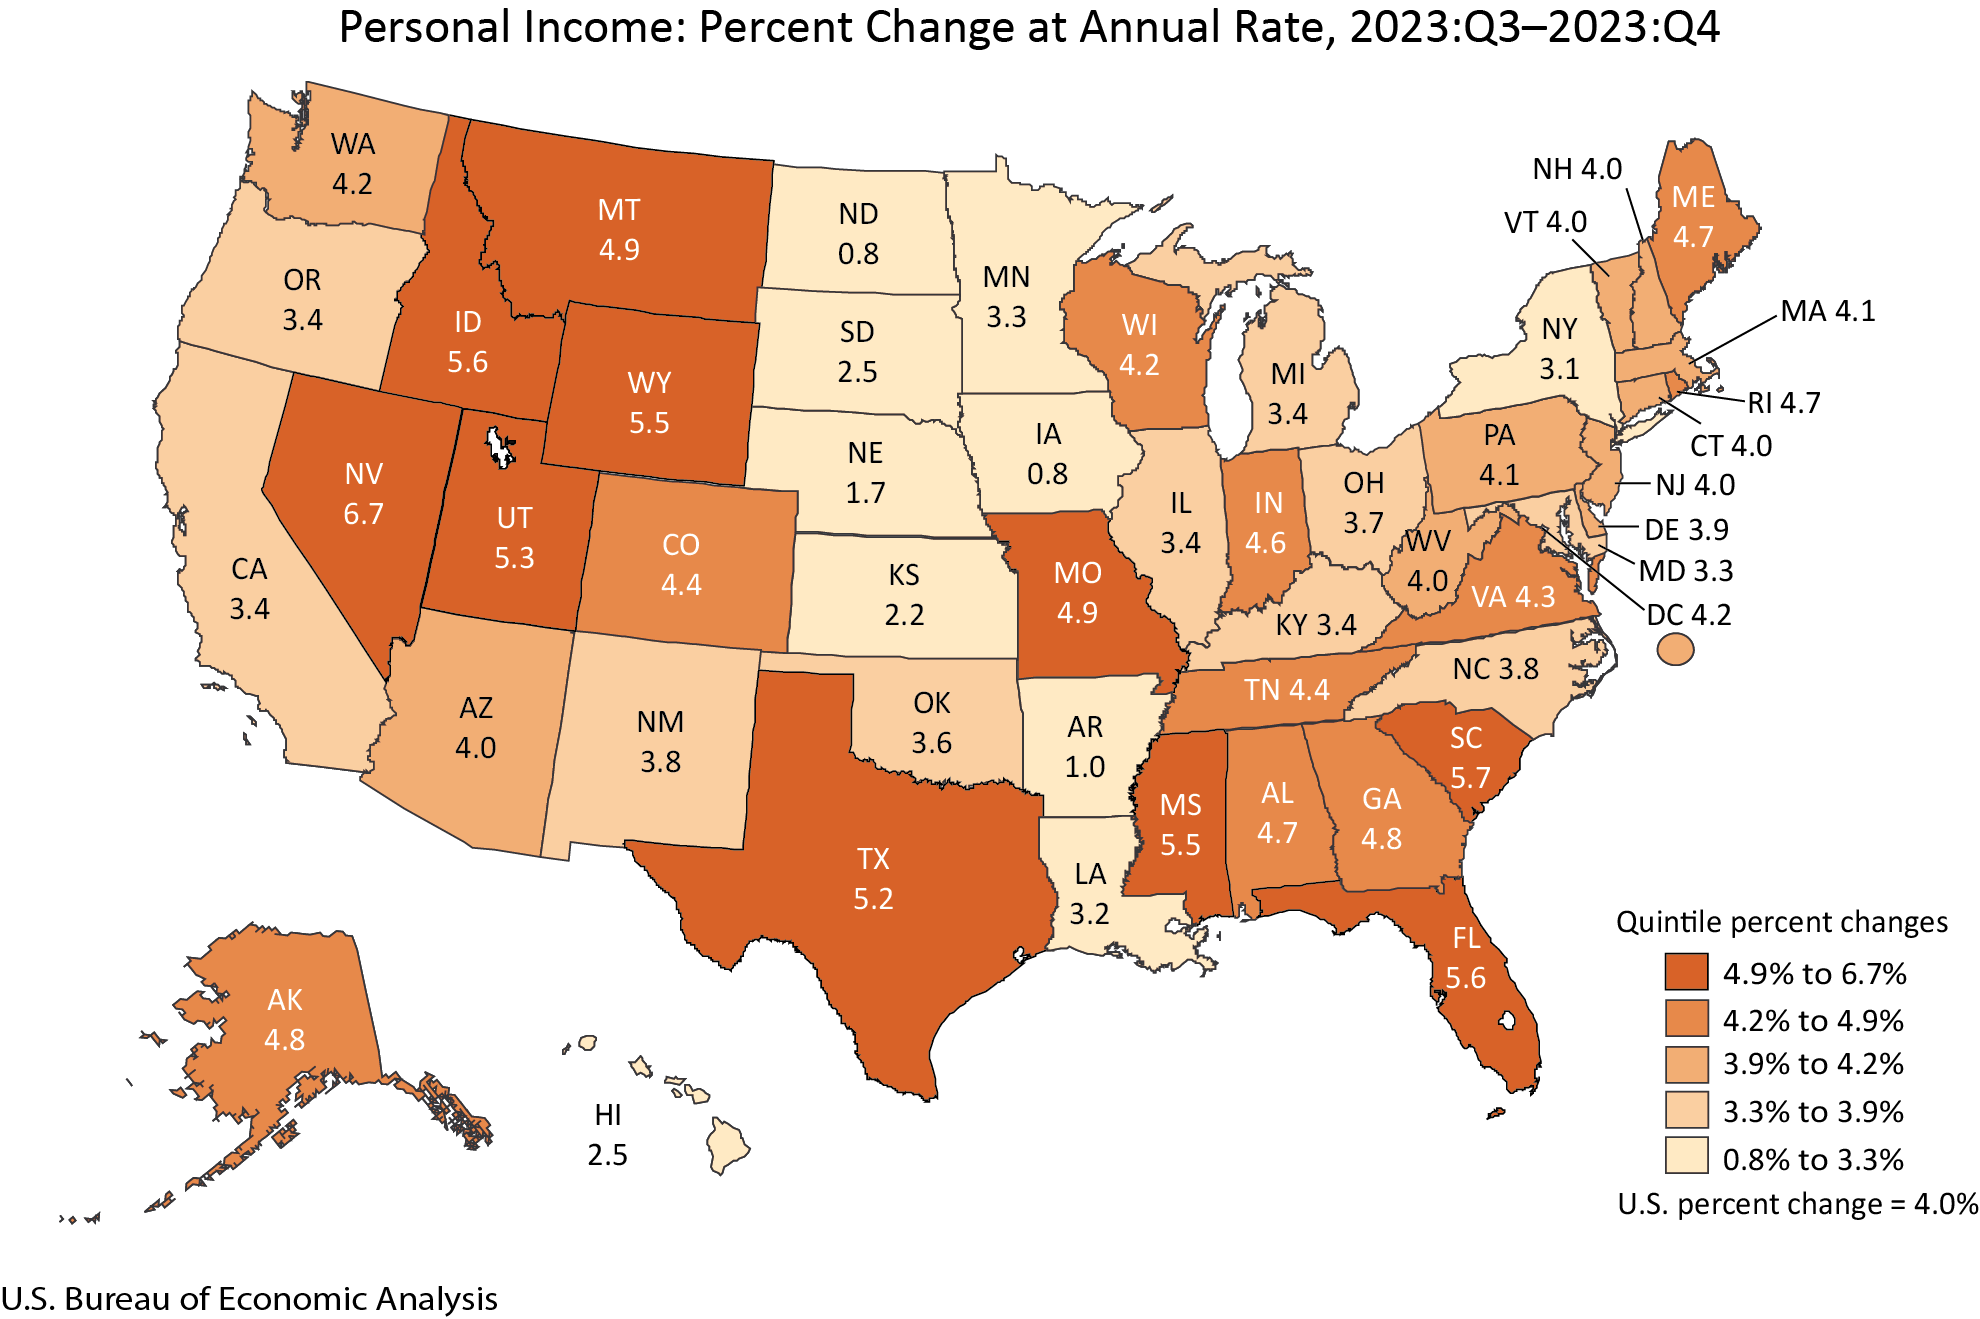 Personal Income: Percent Change at Annual Rate, 2023:Q3-2023:Q4